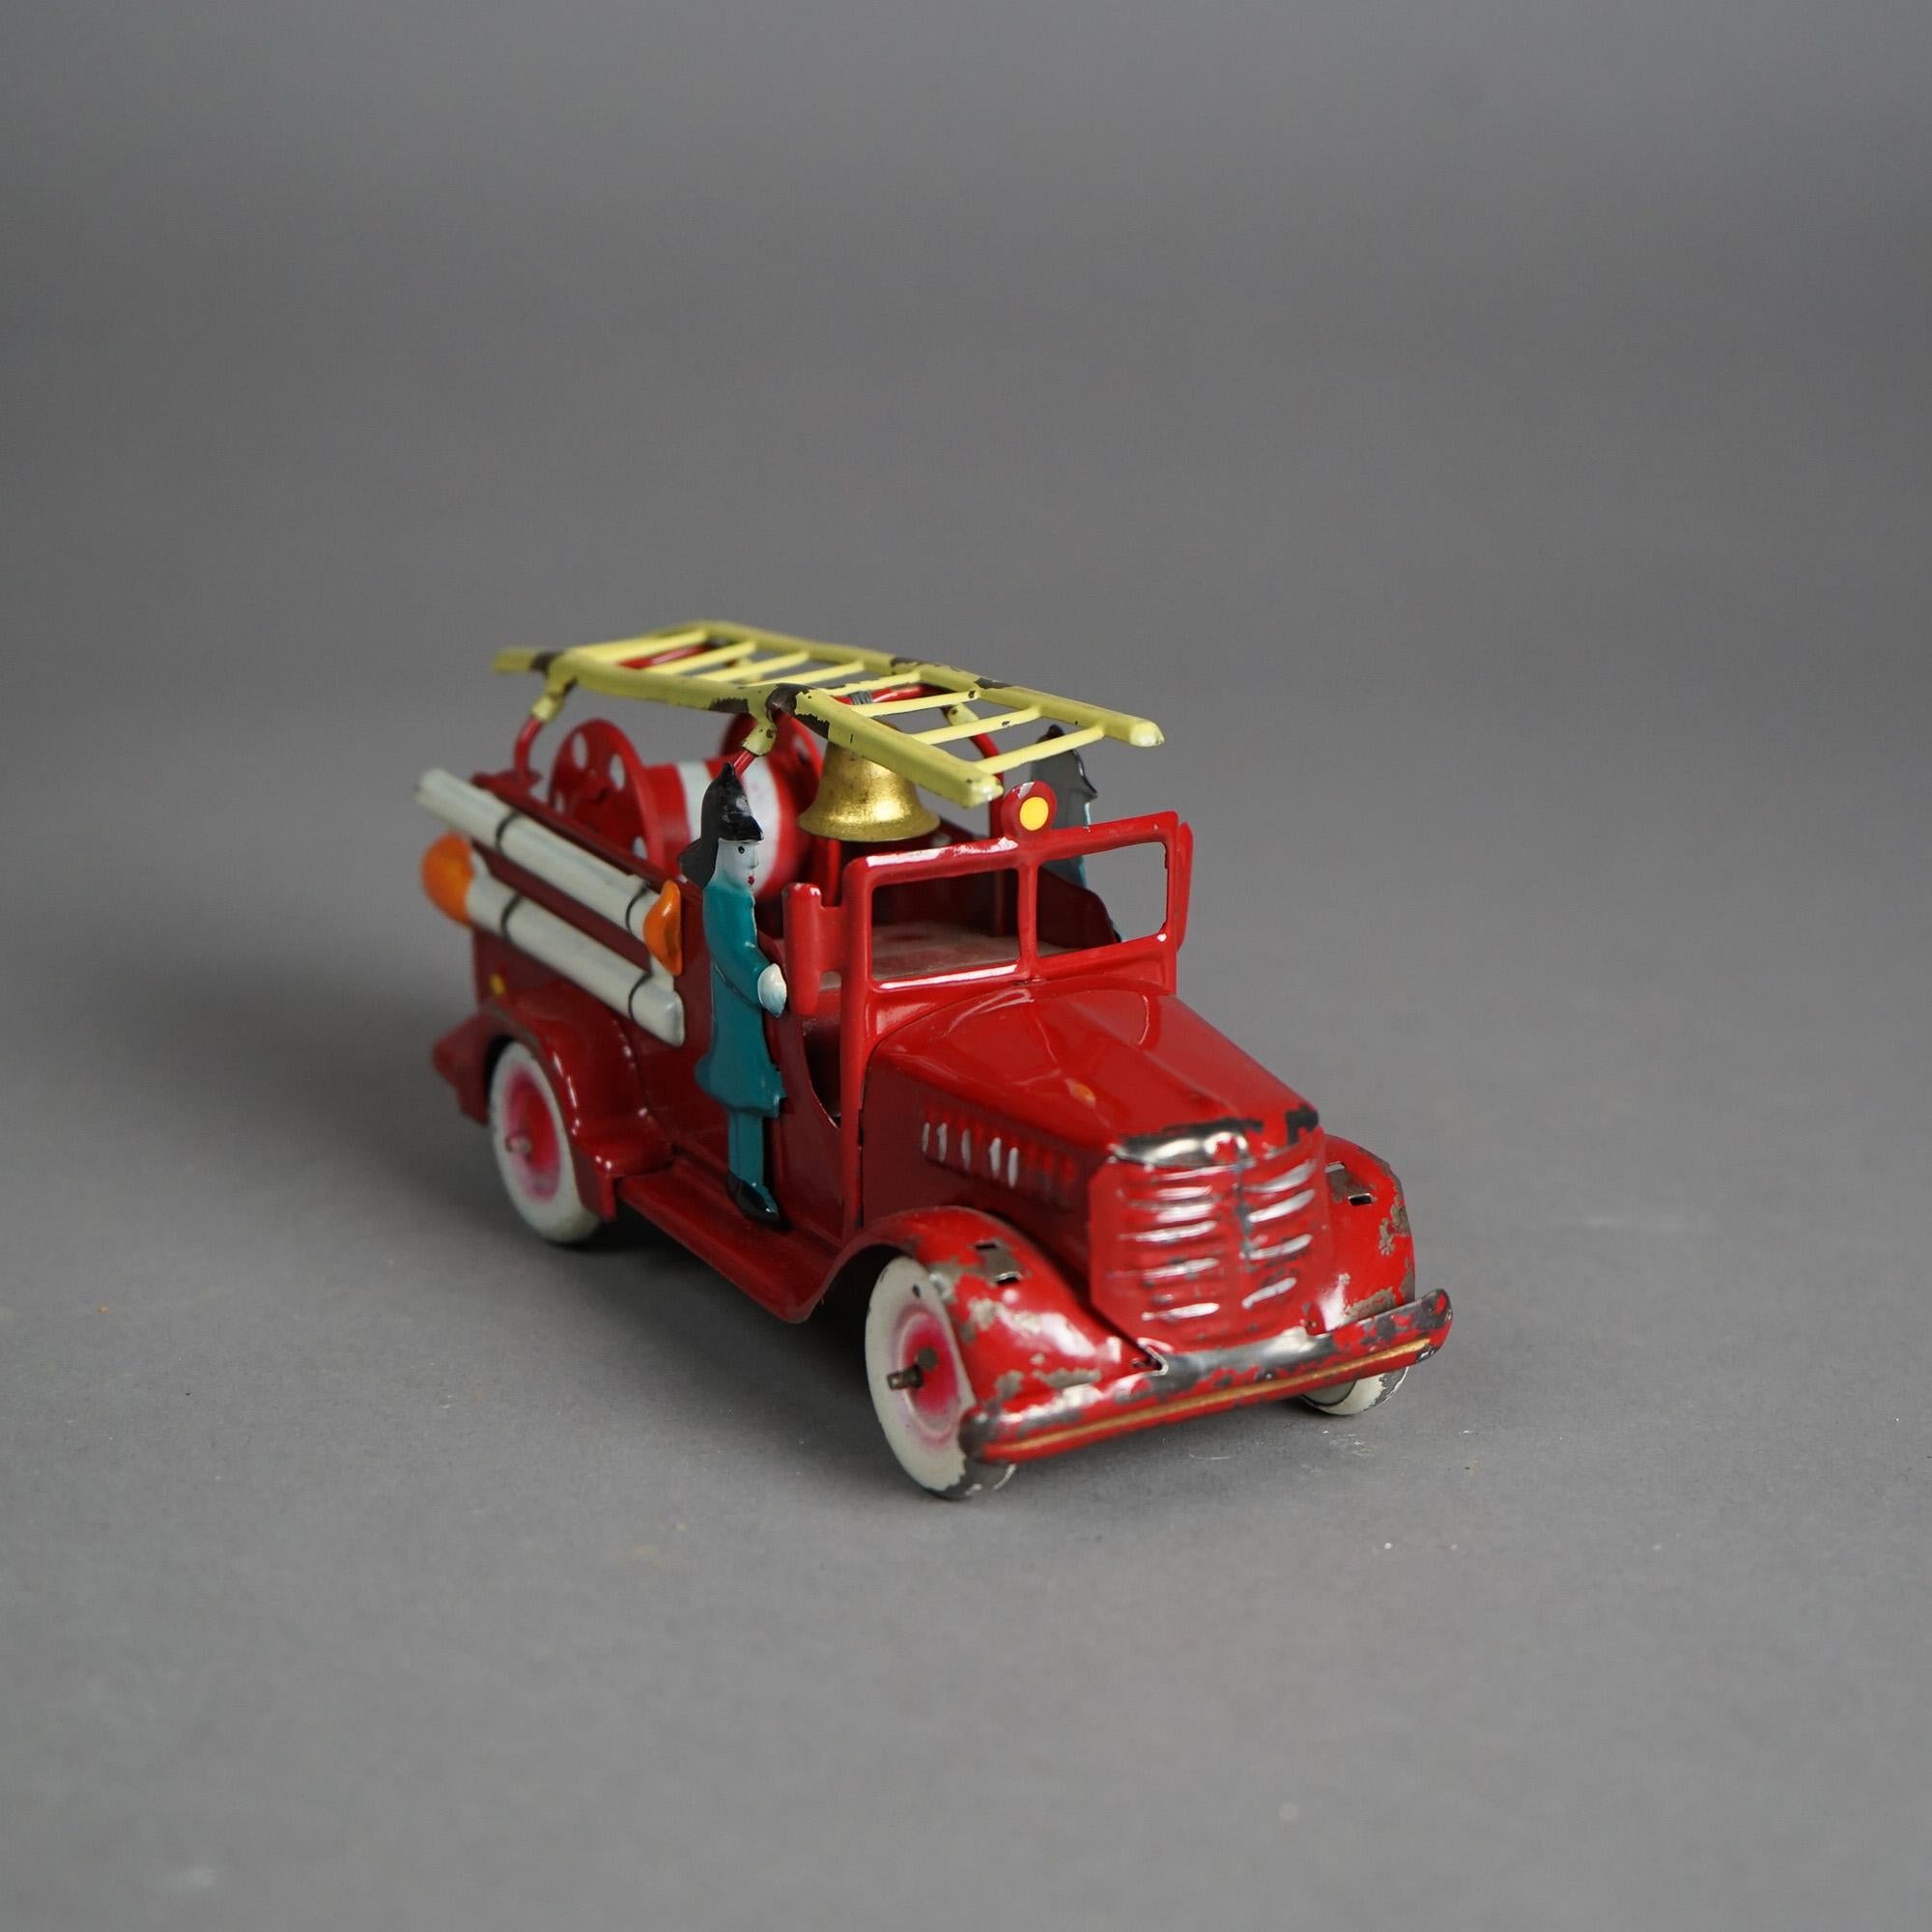 Japanese Tin Litho Toy Fire Engine In The Original Box Circa 1950 1